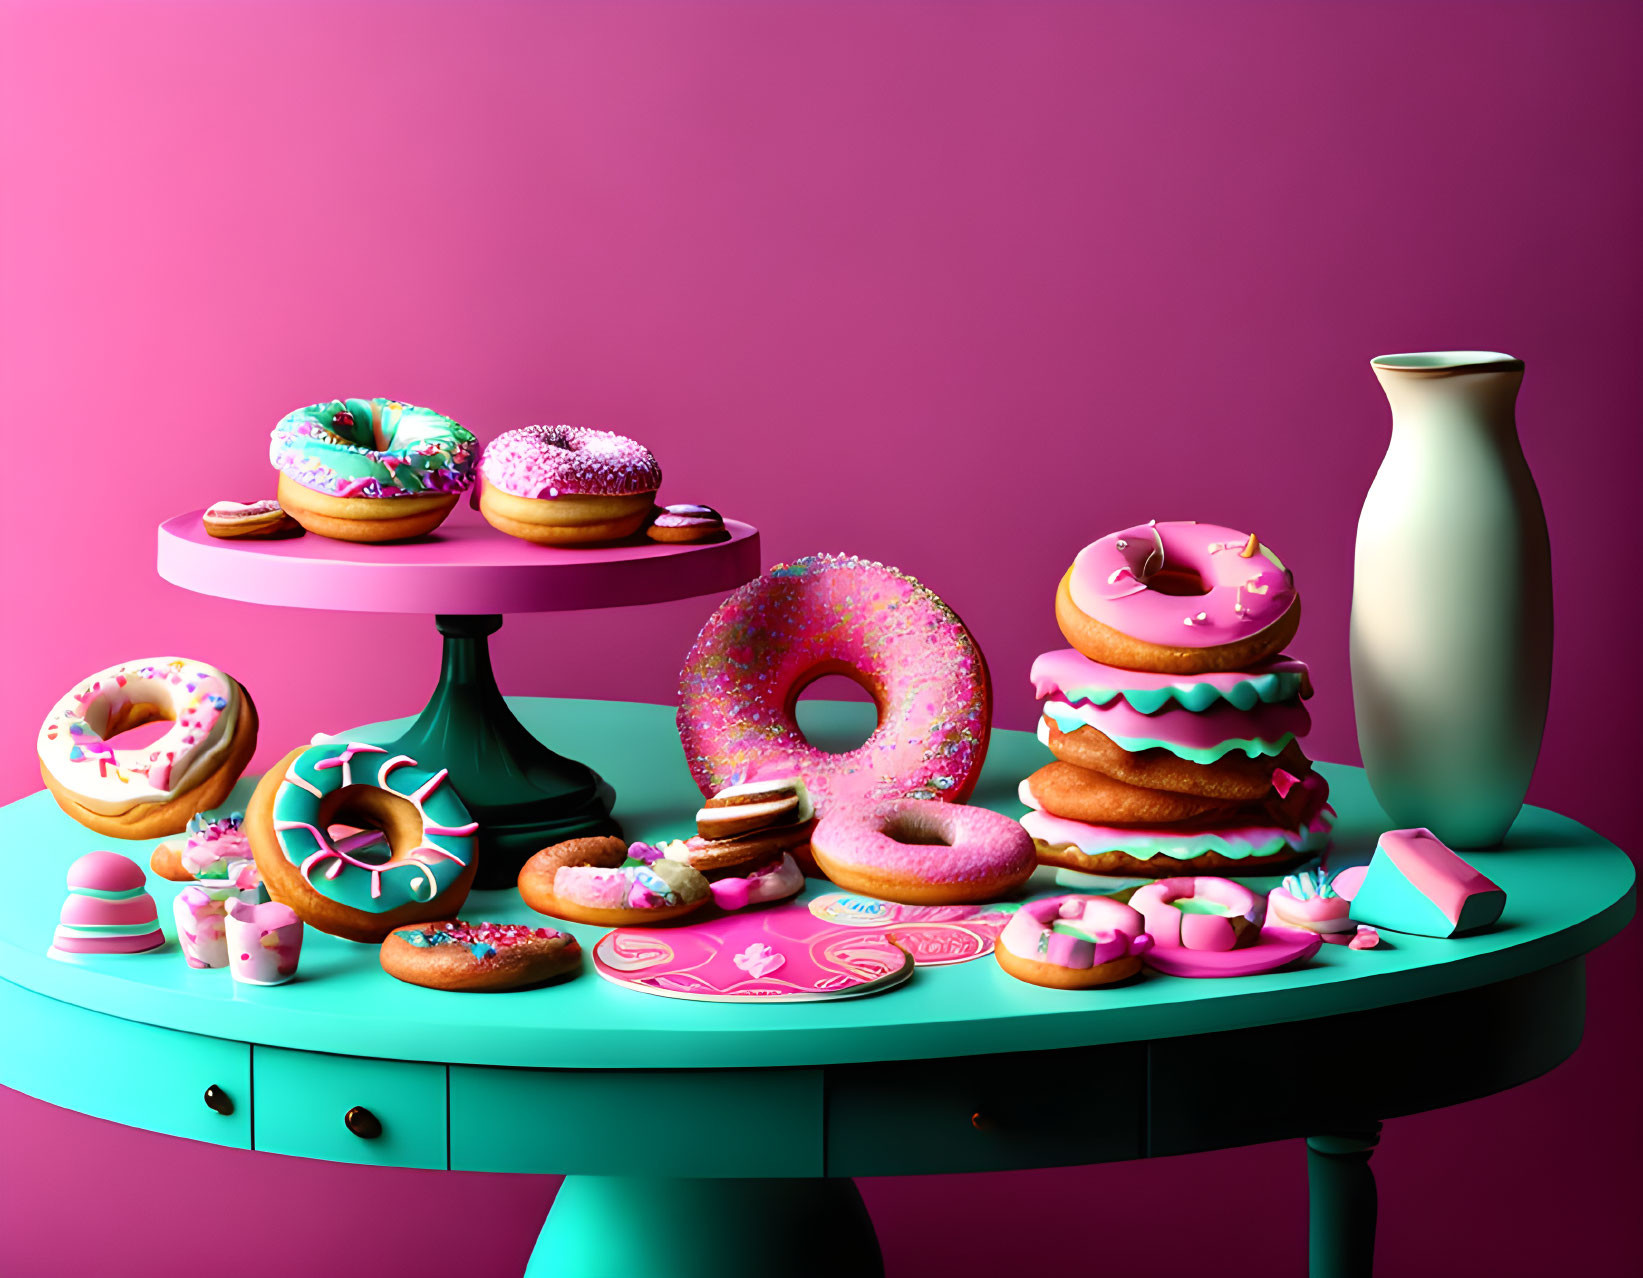 Assorted colorful donuts and pastries on pink and teal table with vase, pink background